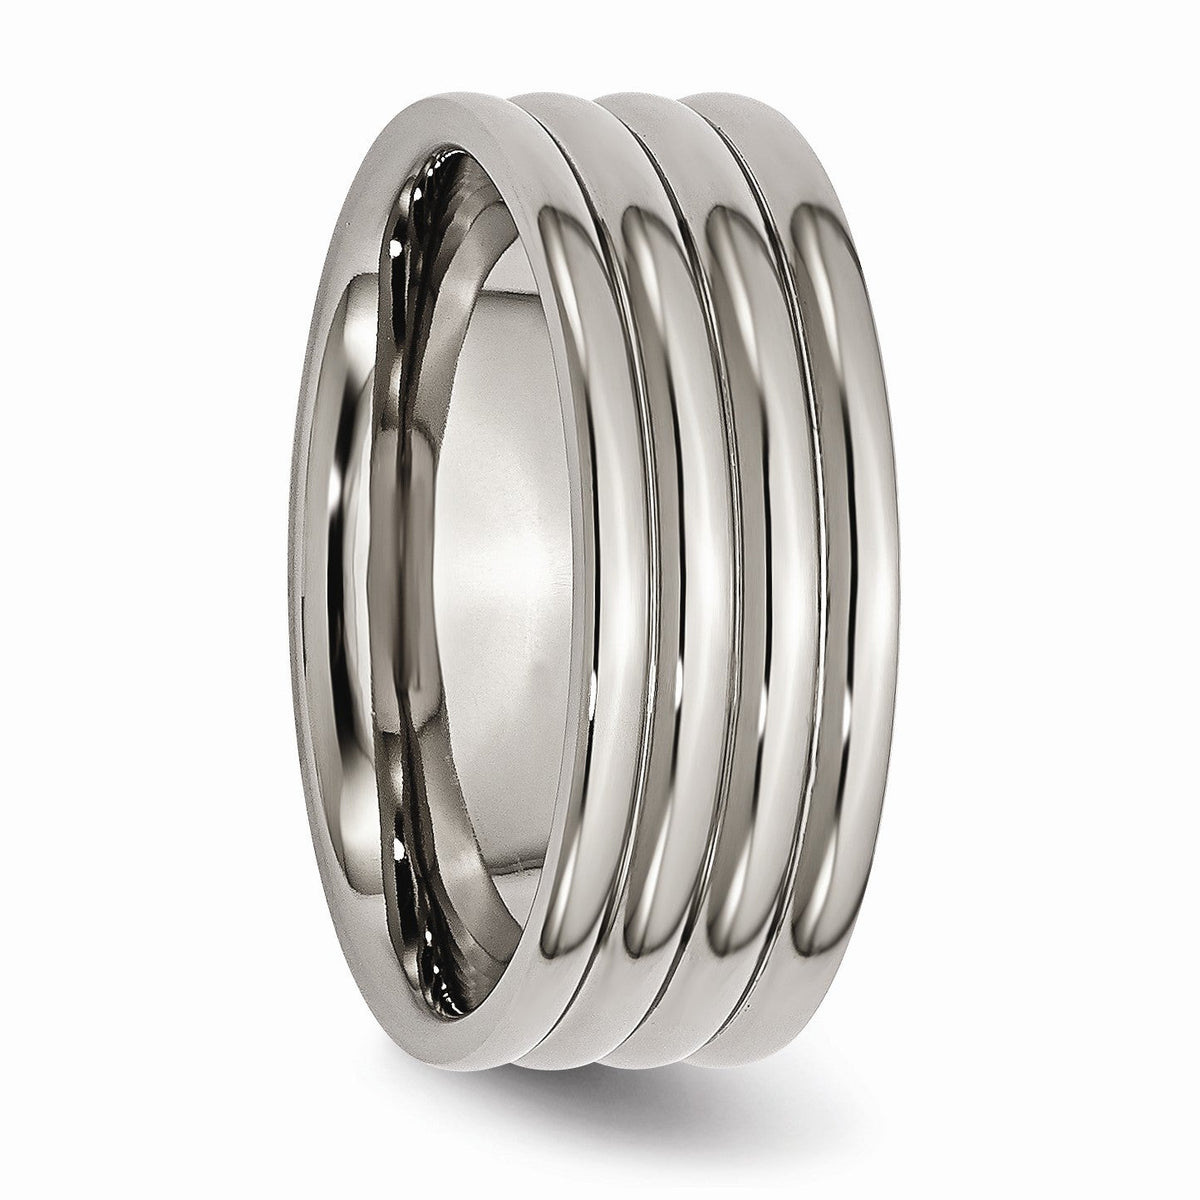 Alternate view of the Titanium 8mm Polished Grooved Comfort Fit Band by The Black Bow Jewelry Co.